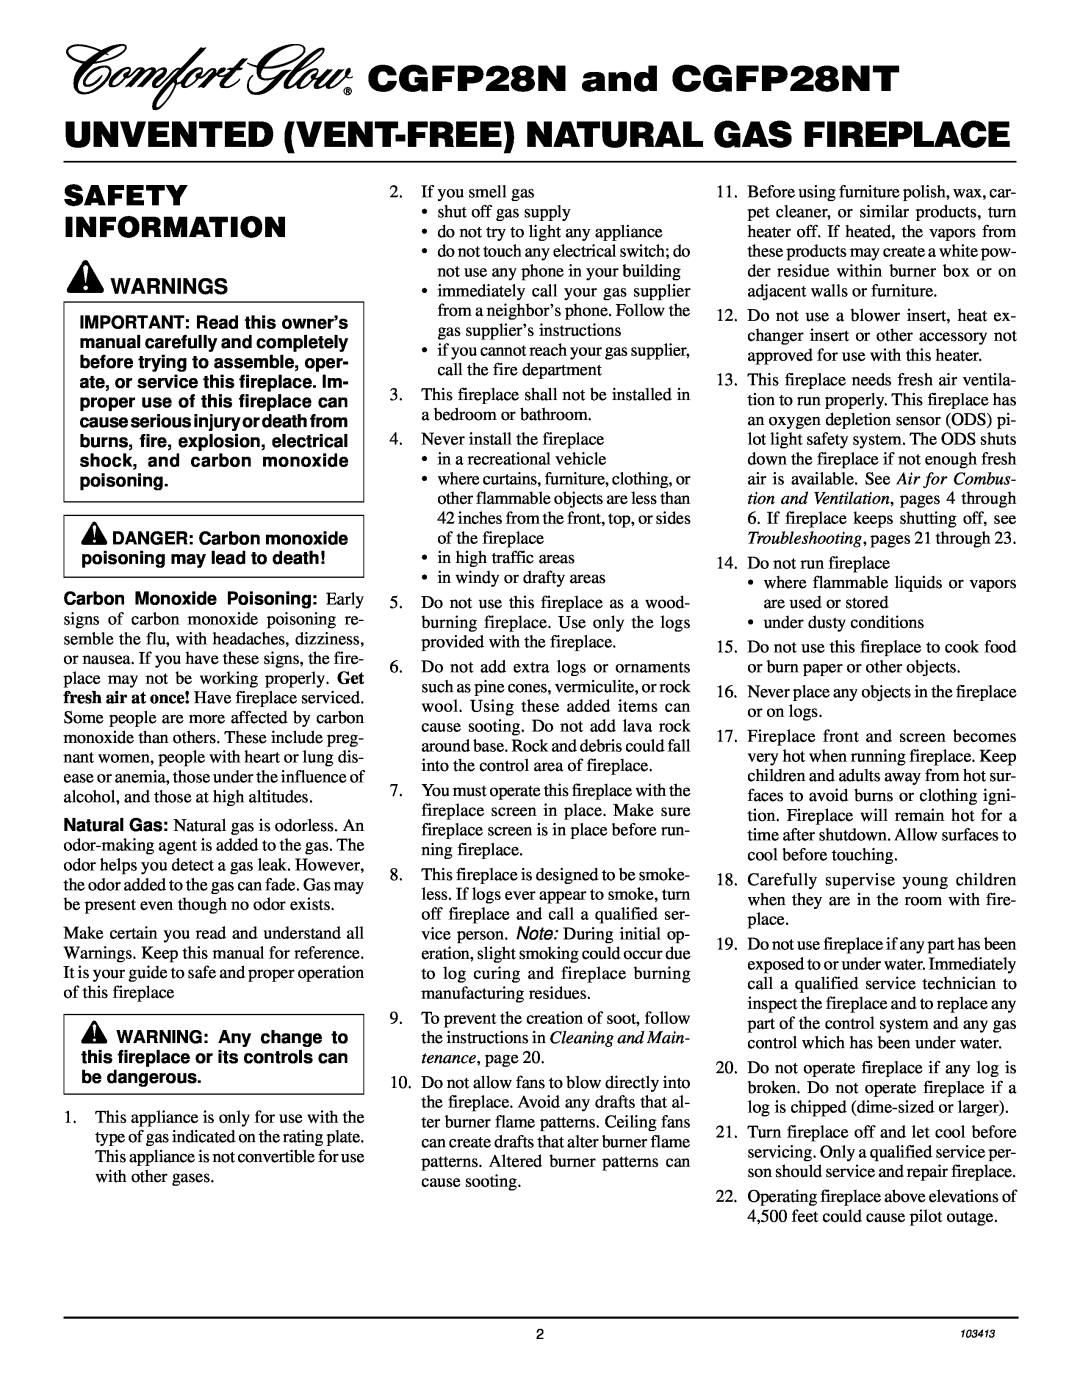 Desa installation manual CGFP28N and CGFP28NT, Unvented Vent-Freenatural Gas Fireplace, Safety Information, Warnings 